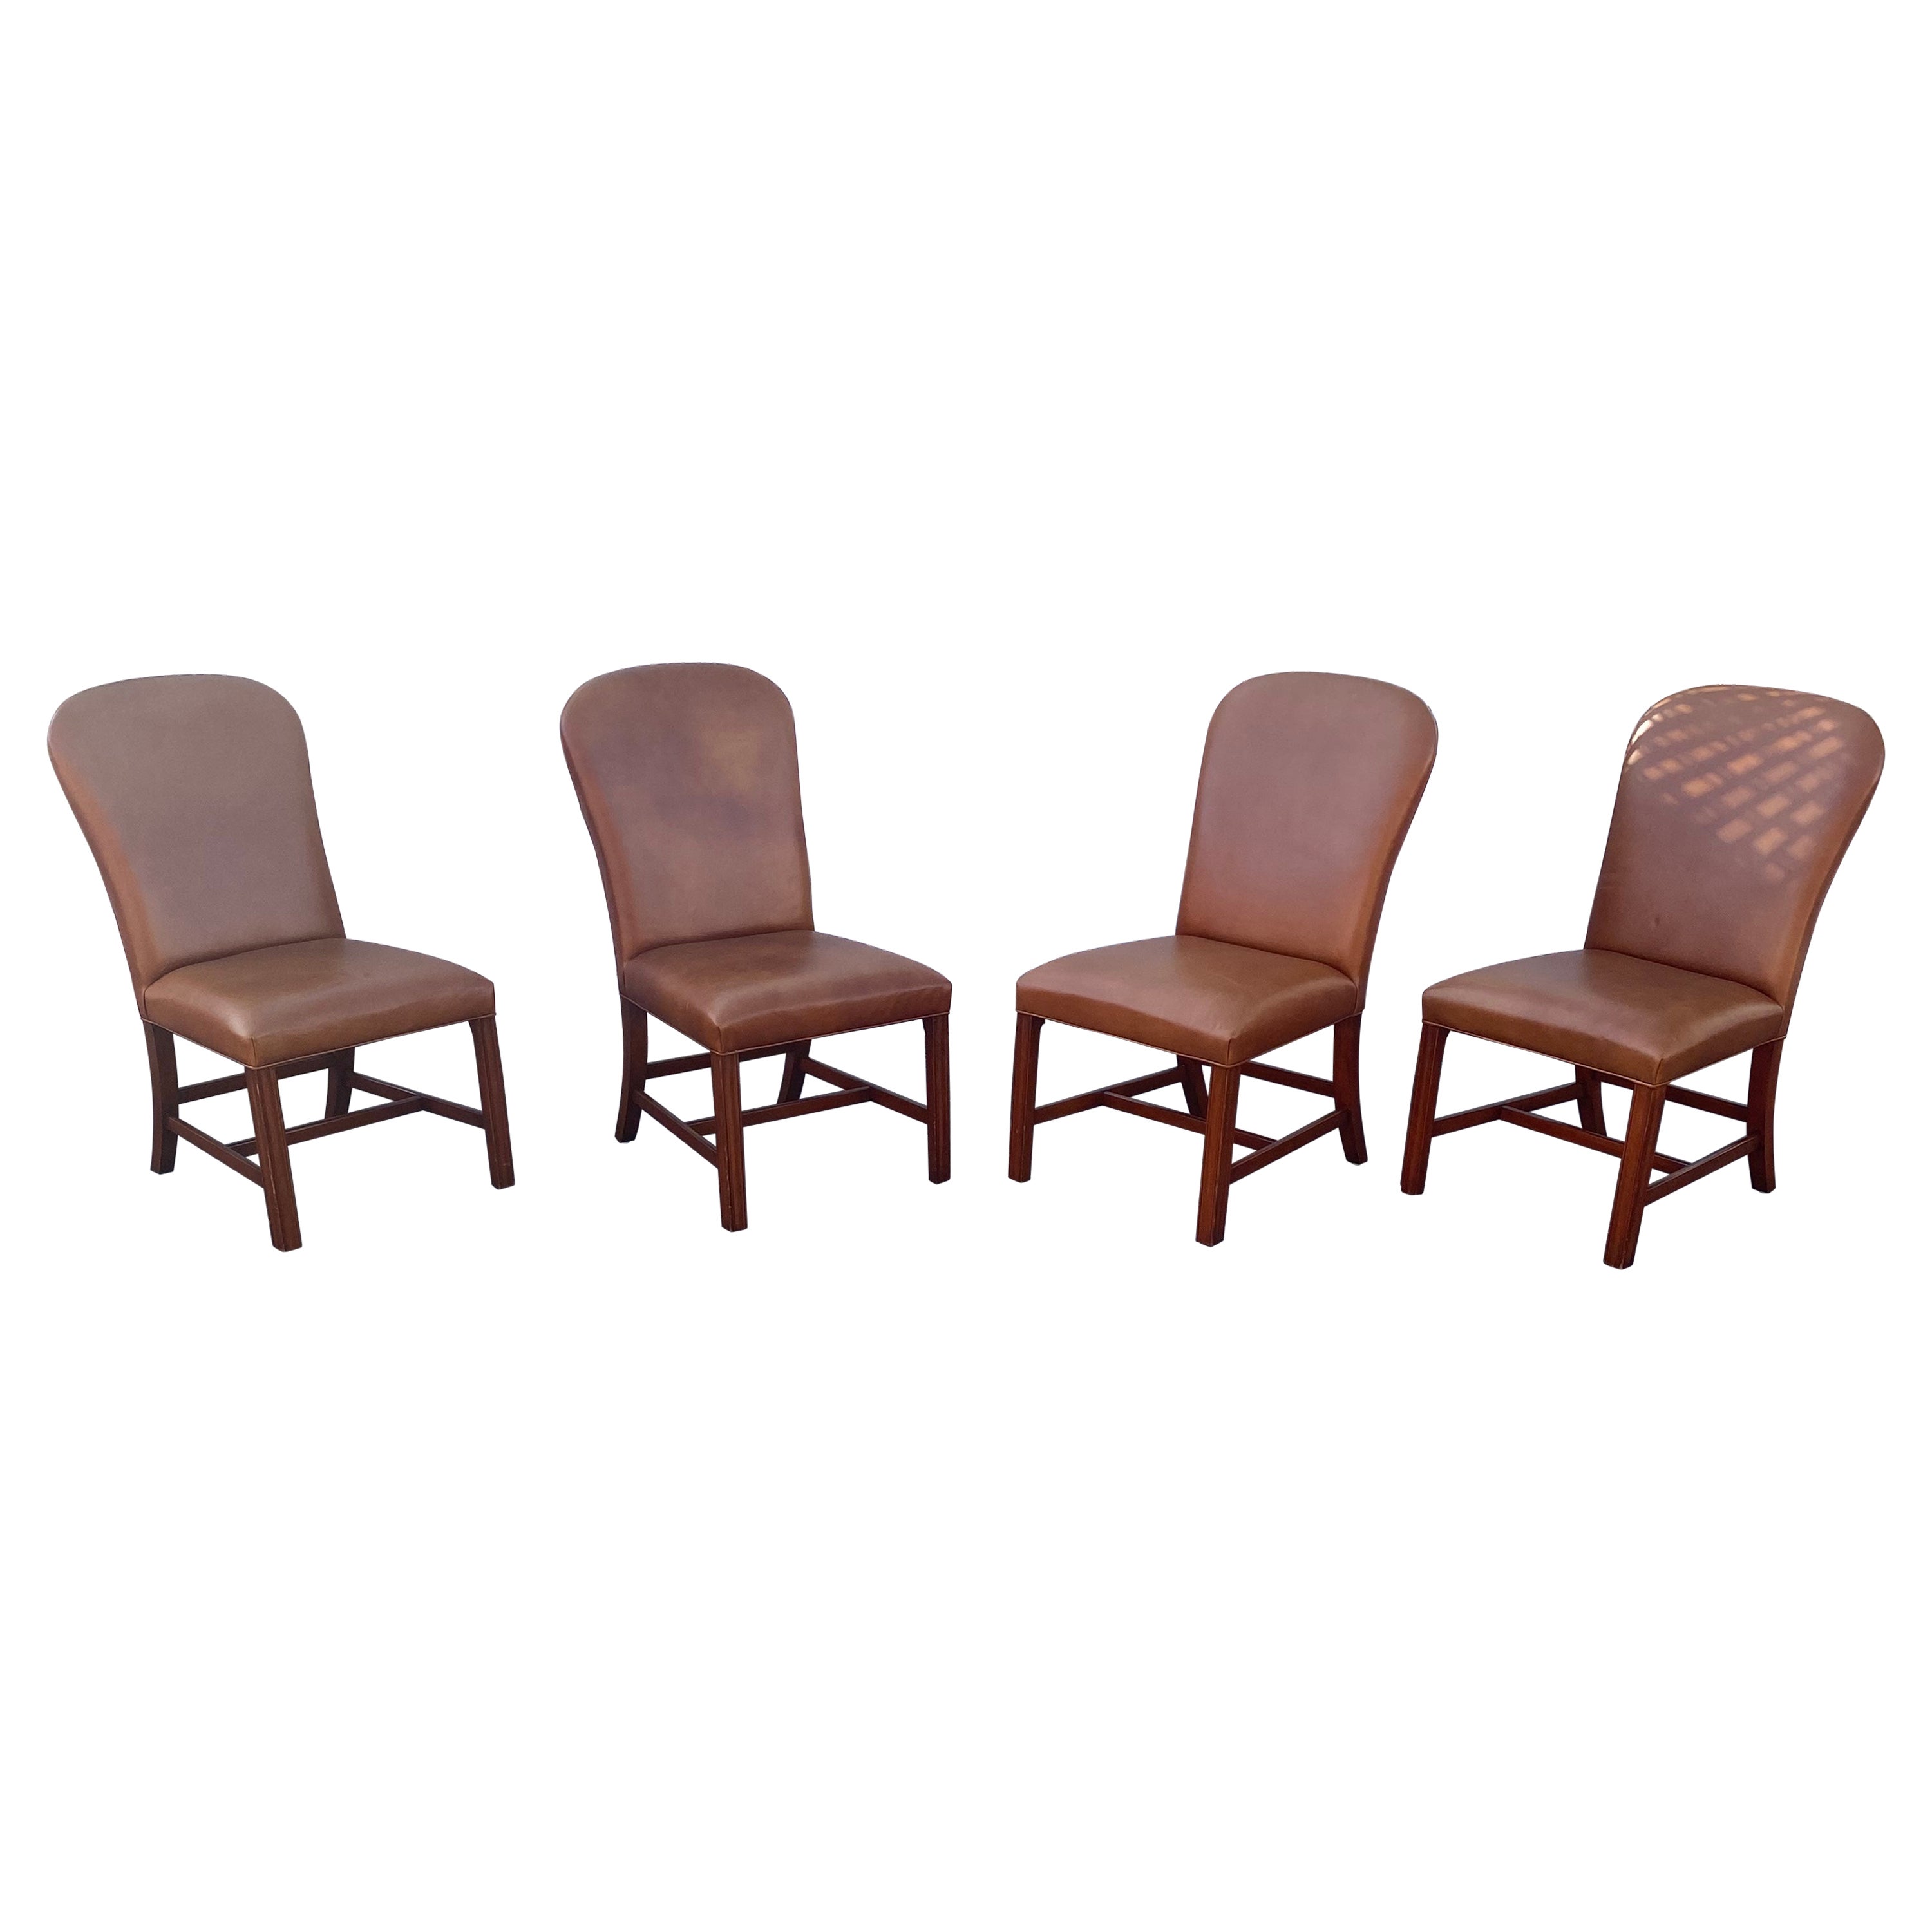 2000s Ralph Lauren Saddle Leather Dining Chairs, Set of 4 For Sale